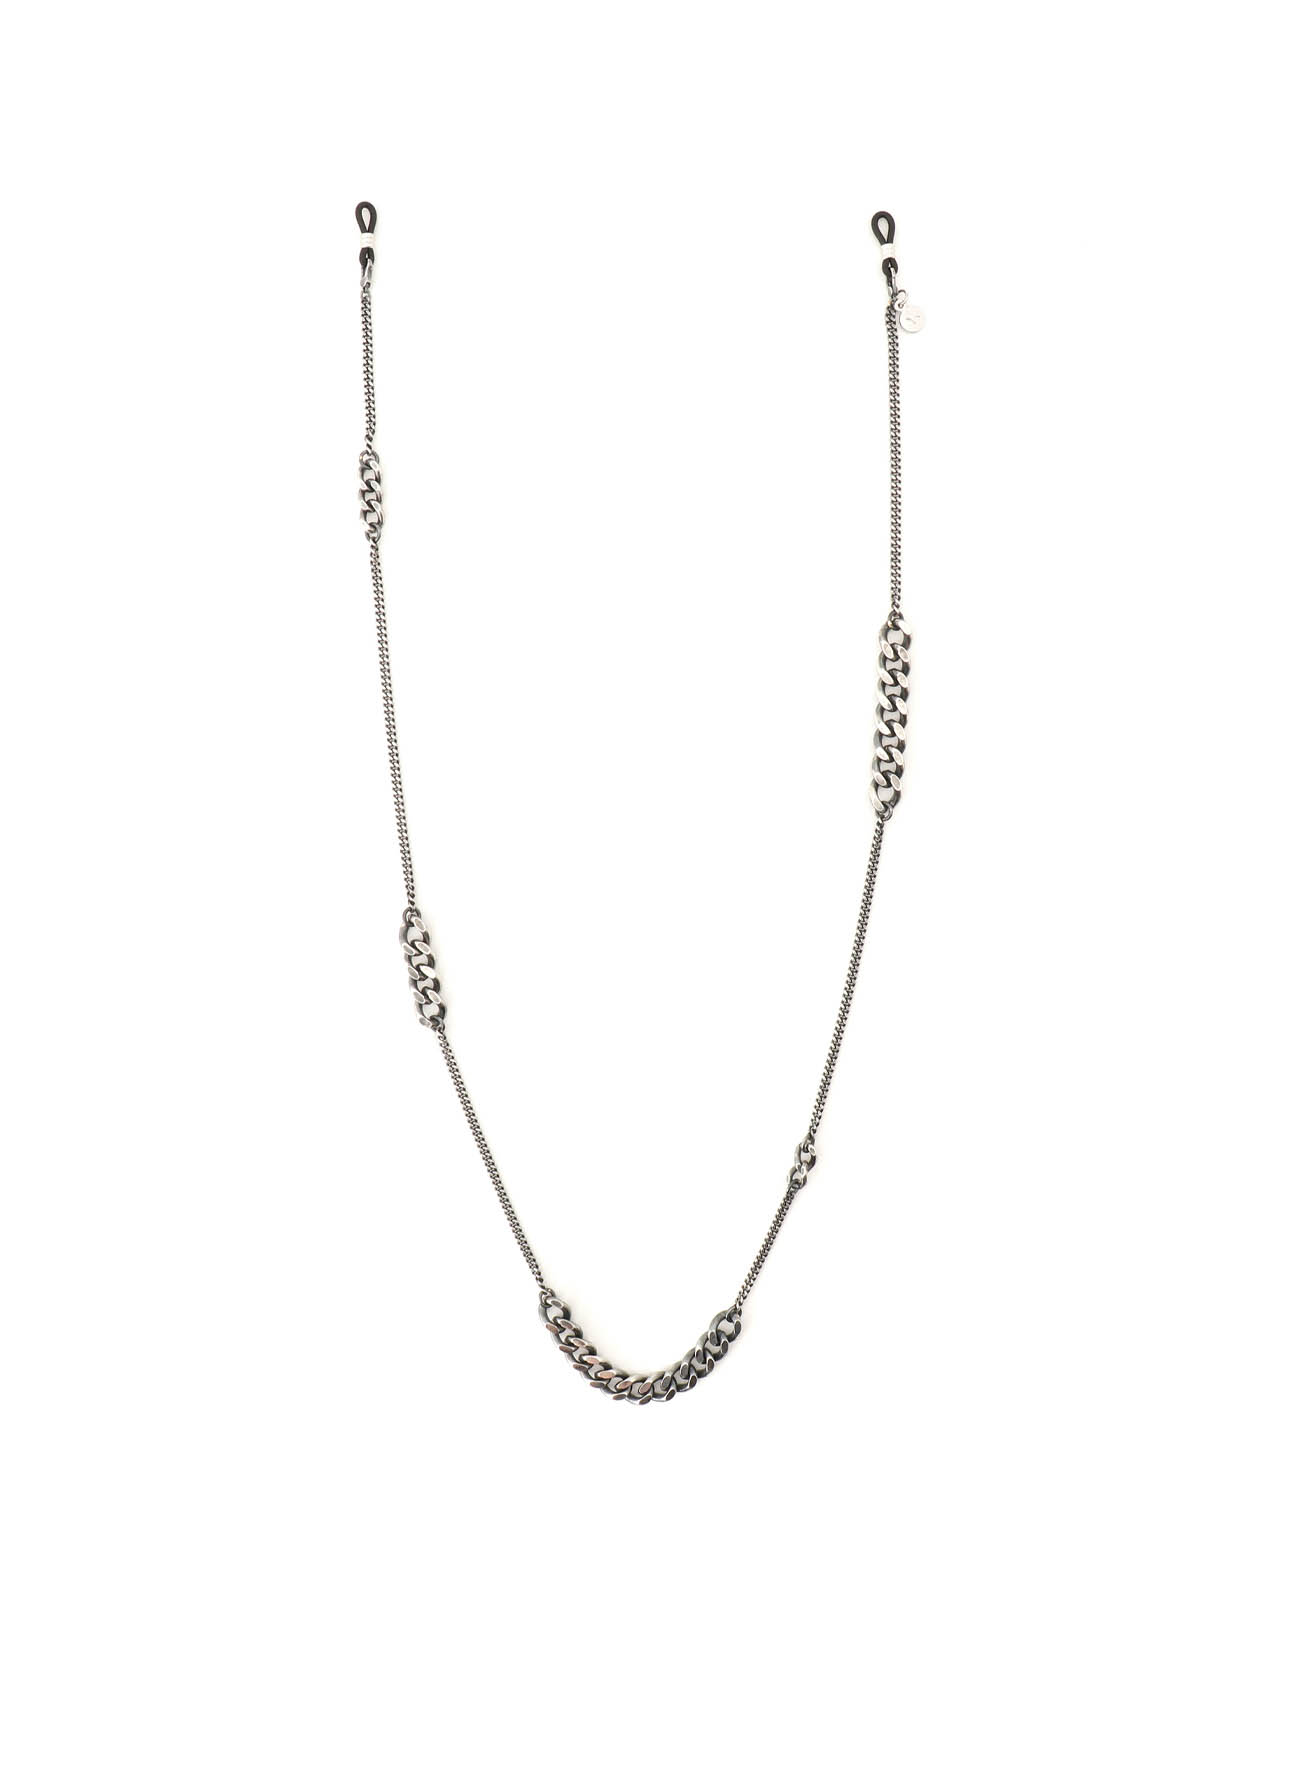 SILVER 925 3 WAYS CHAIN NECKLACE L